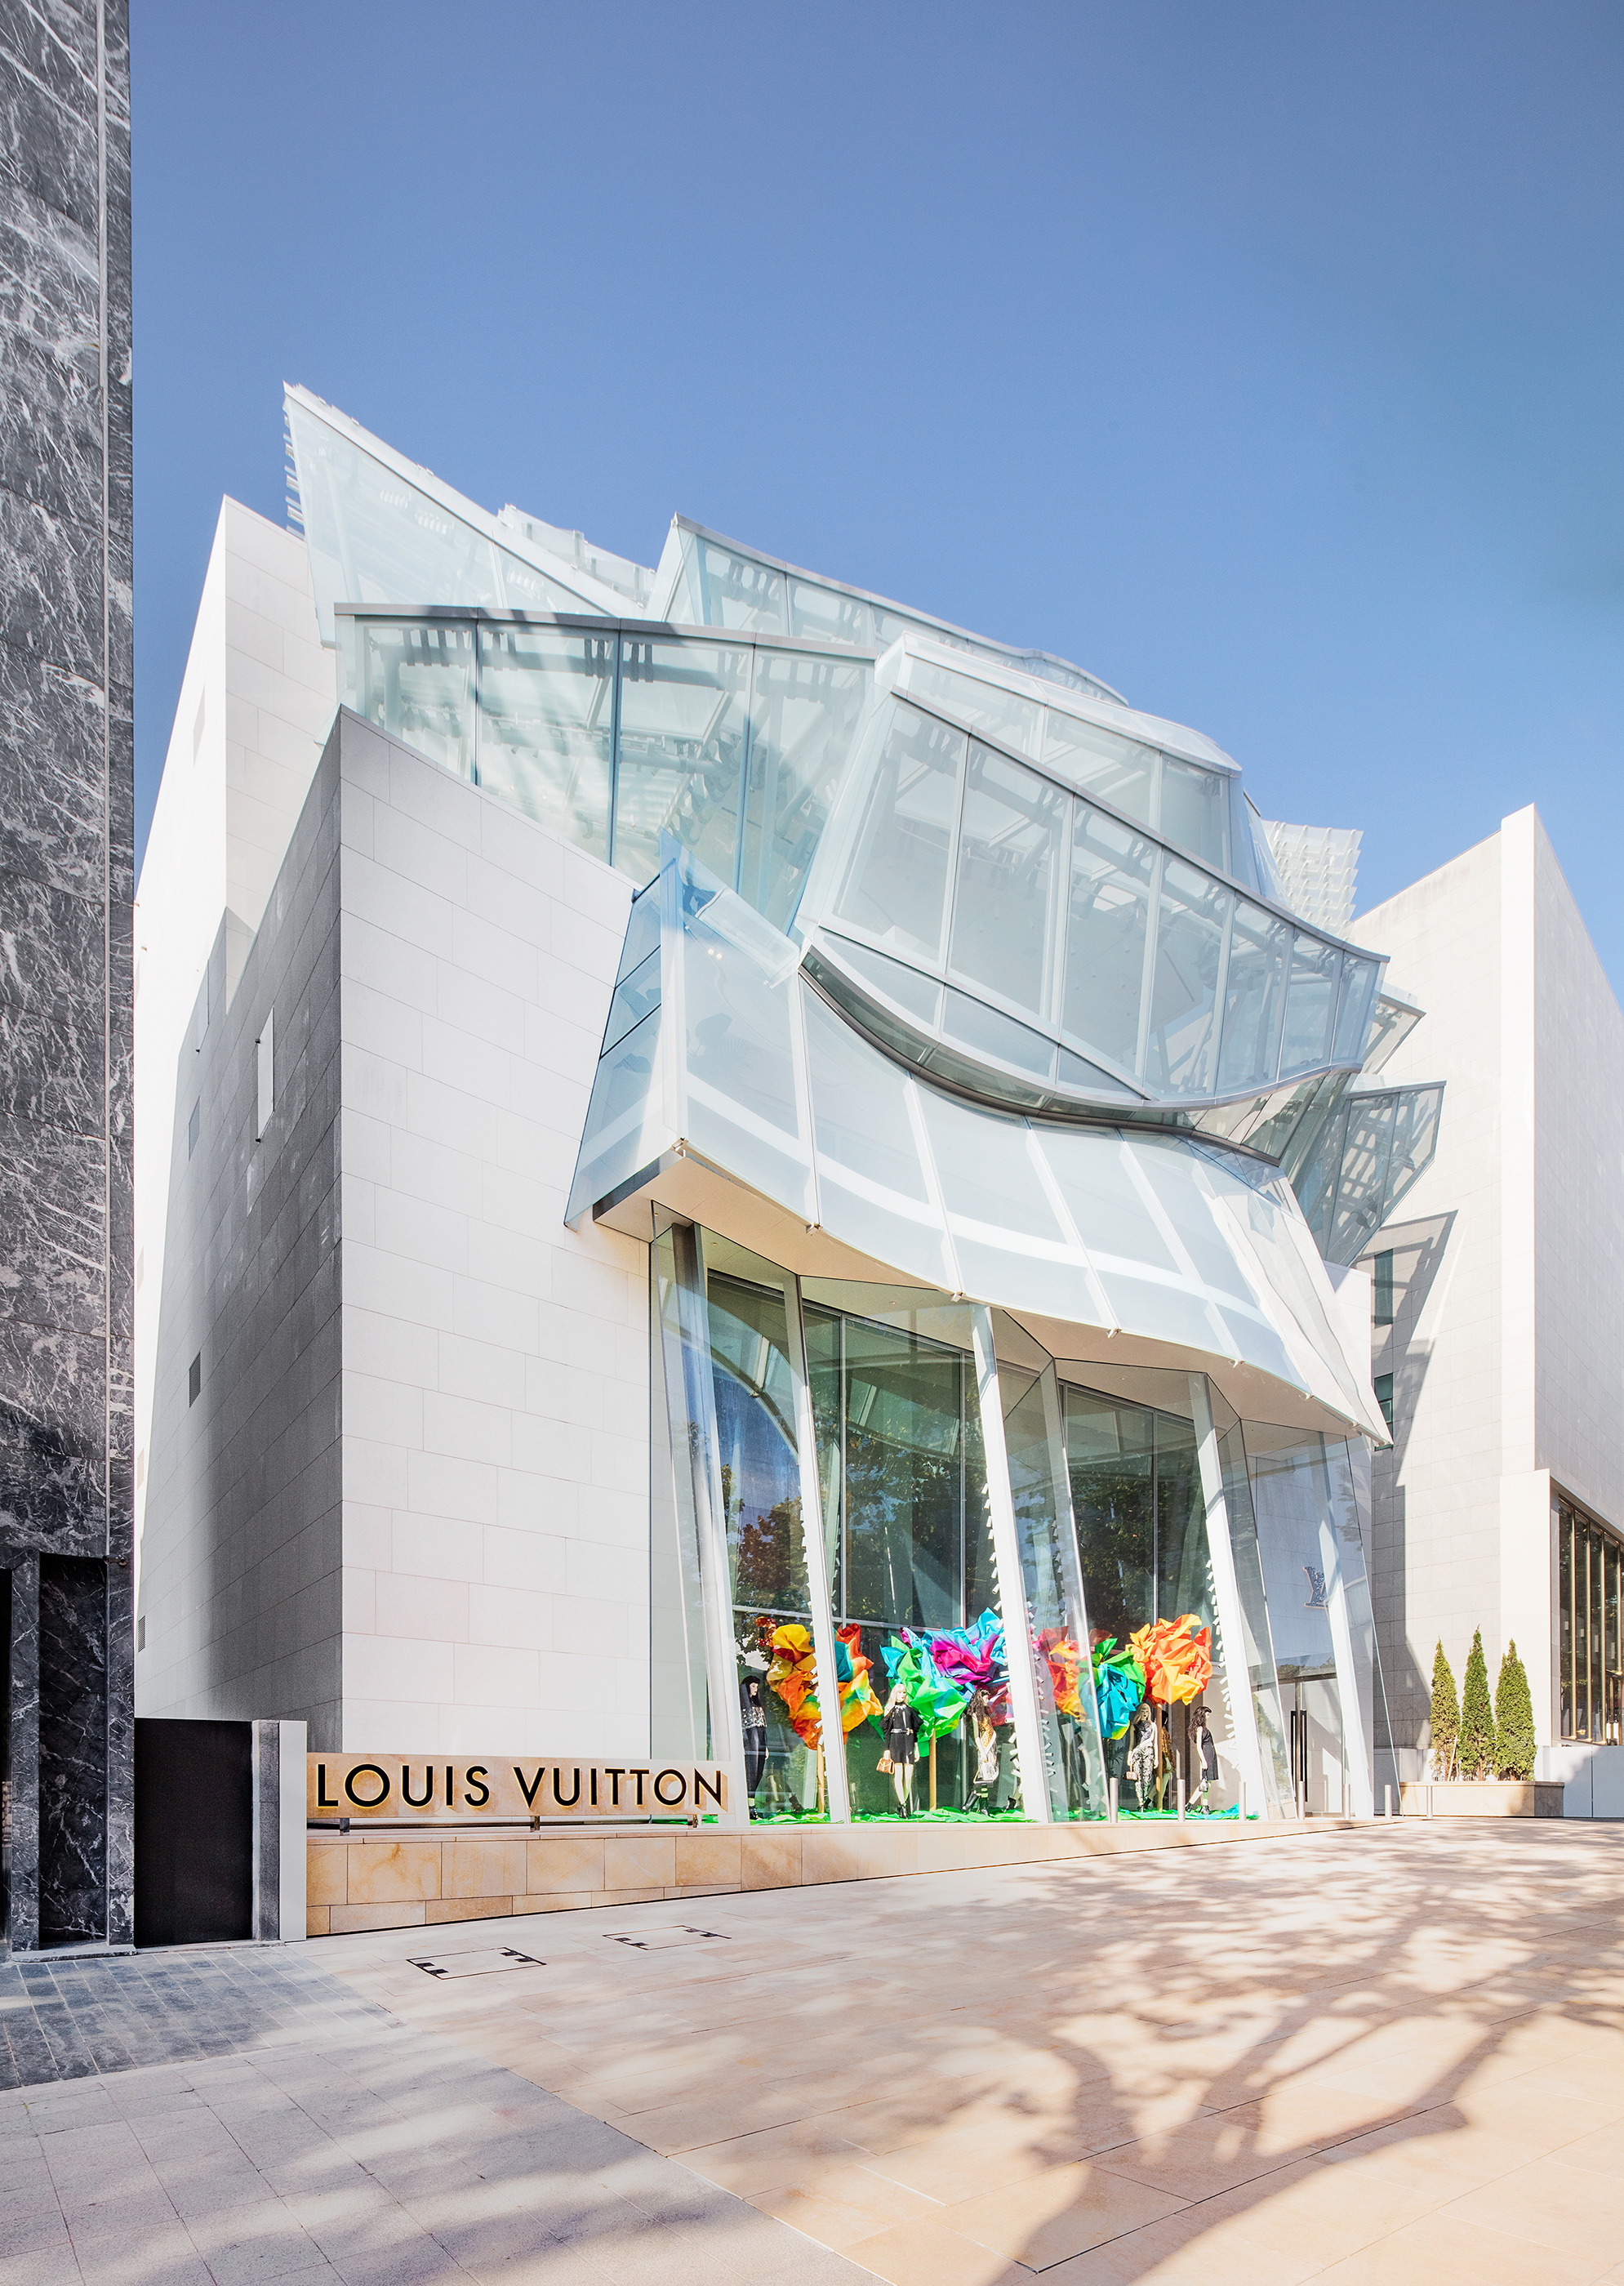 designboom on X: frank gehry and peter marino design louis vuitton's  flagship seoul store   / X